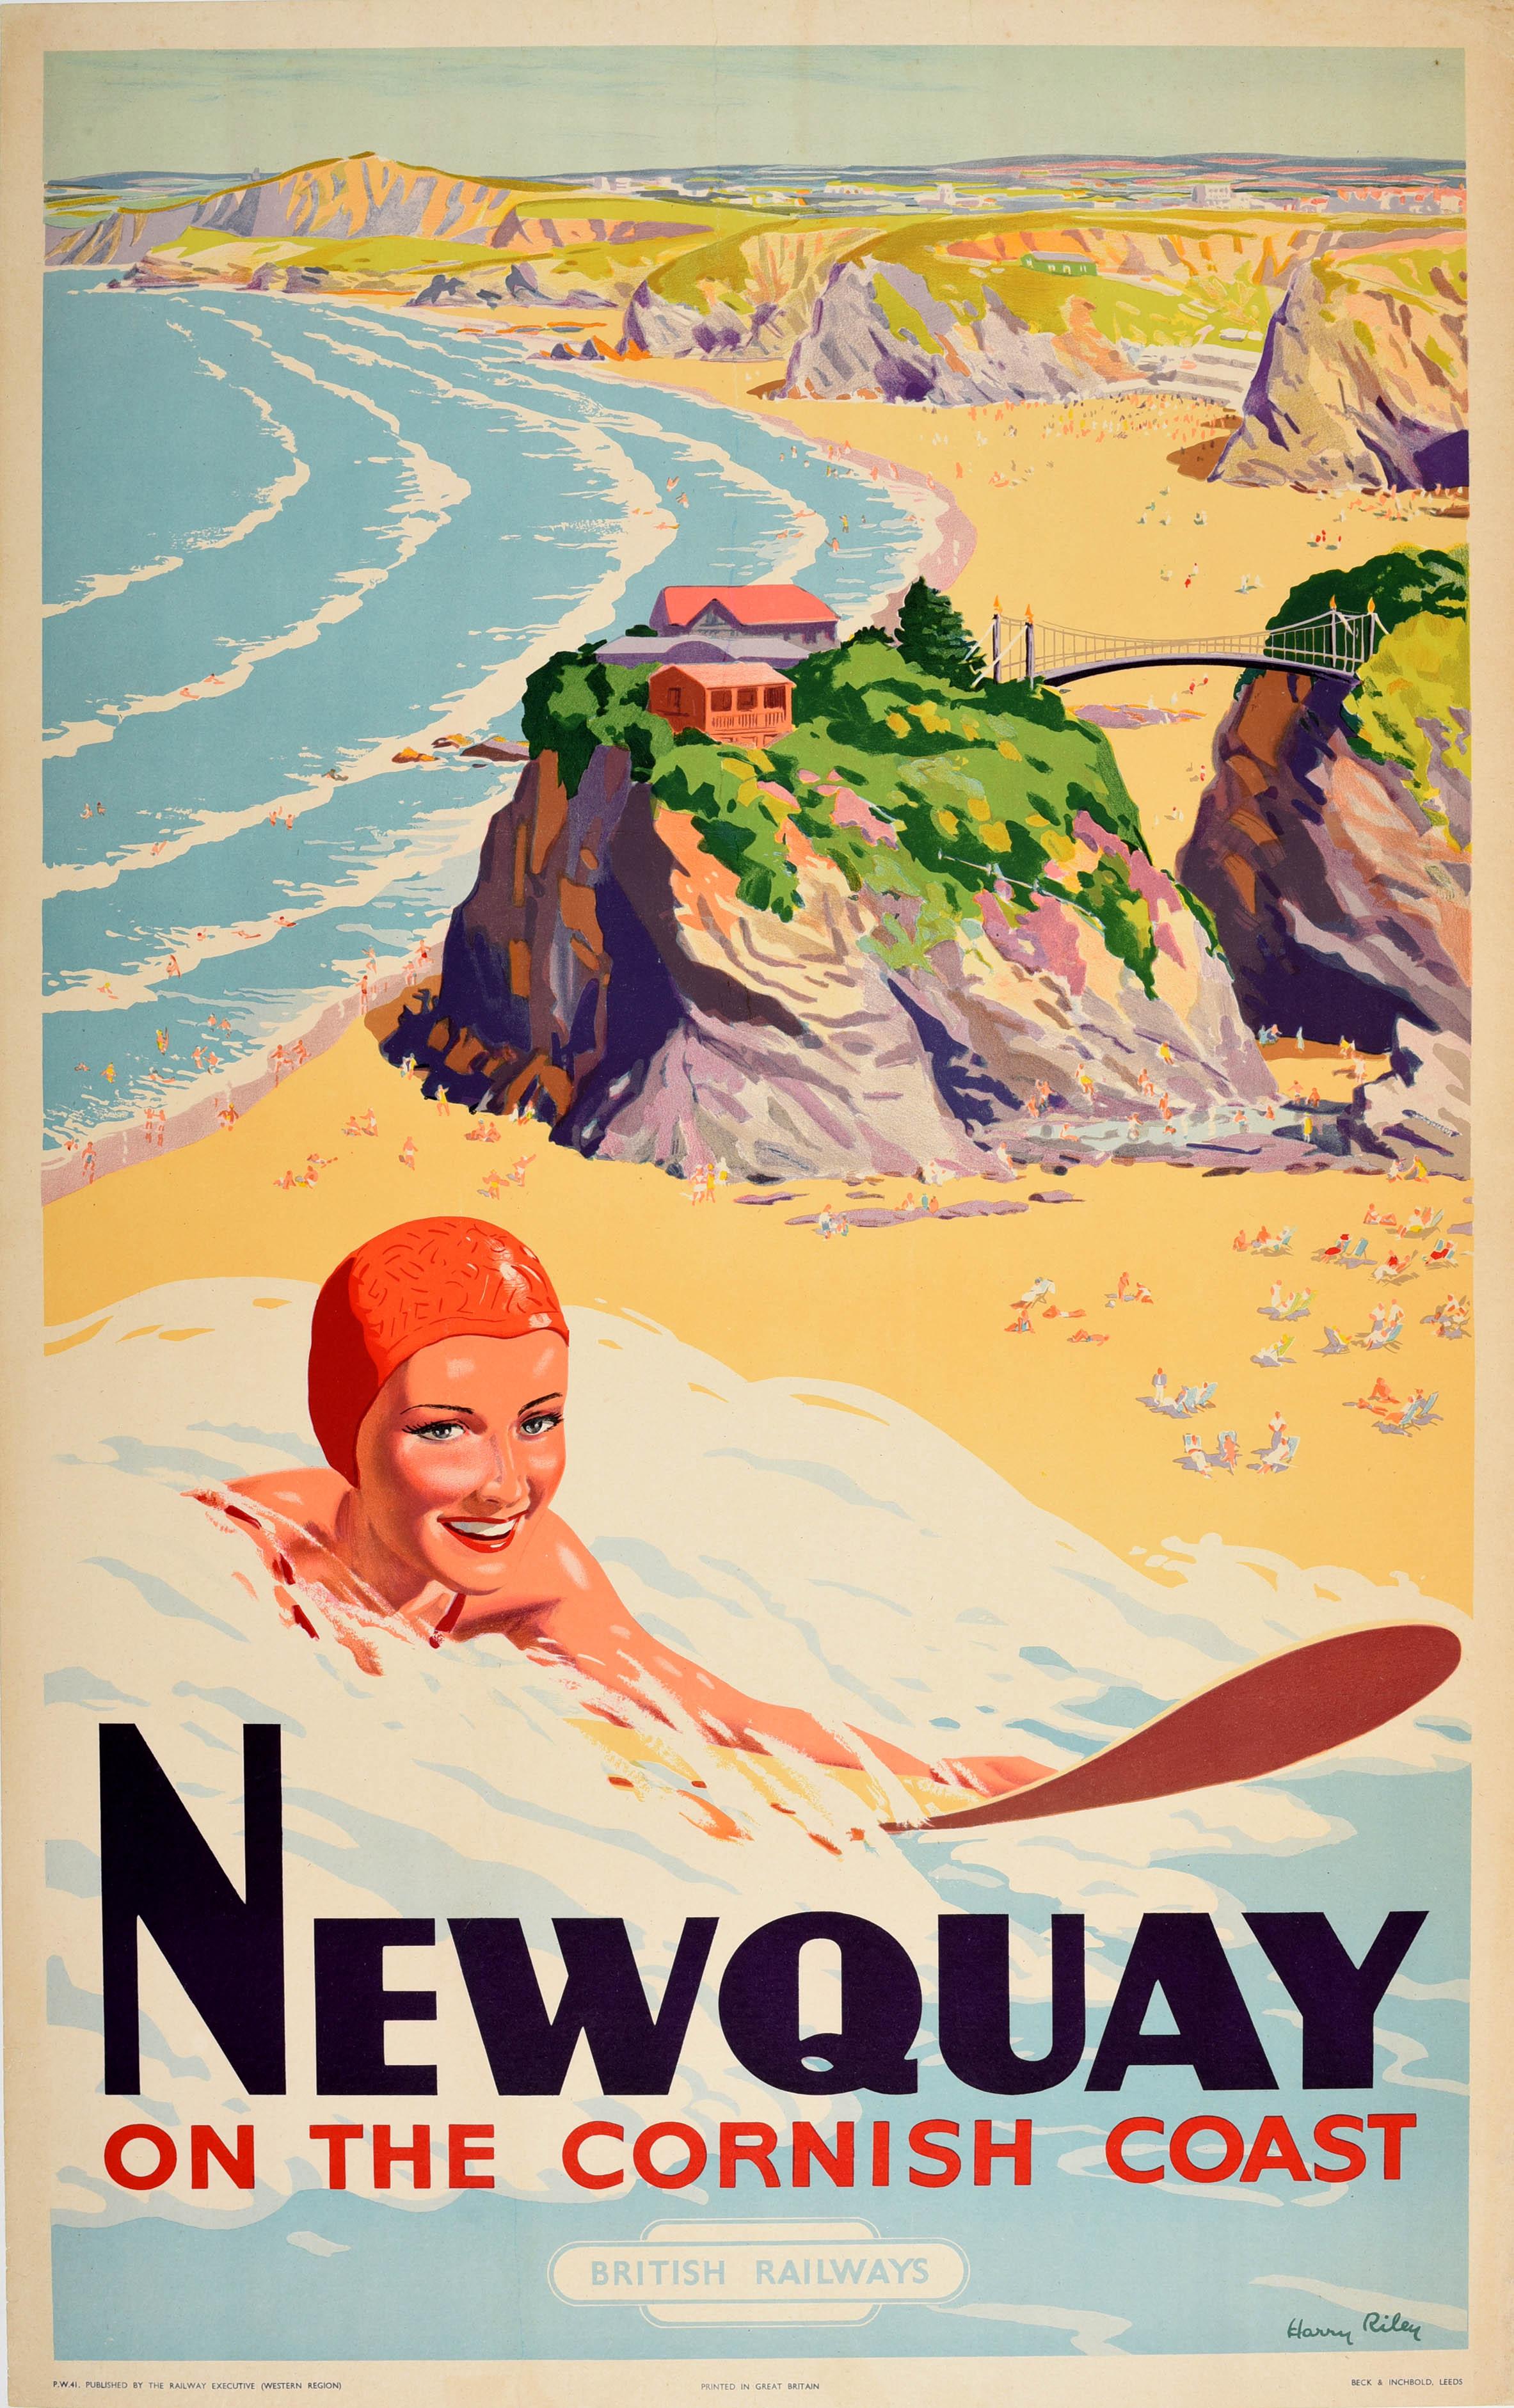 Original vintage British Railways travel advertising poster for Newquay on the Cornish Coast featuring a fantastic image of a smiling lady surfer wearing a red swimming cap riding a wave in the foreground with people on a sandy beach below